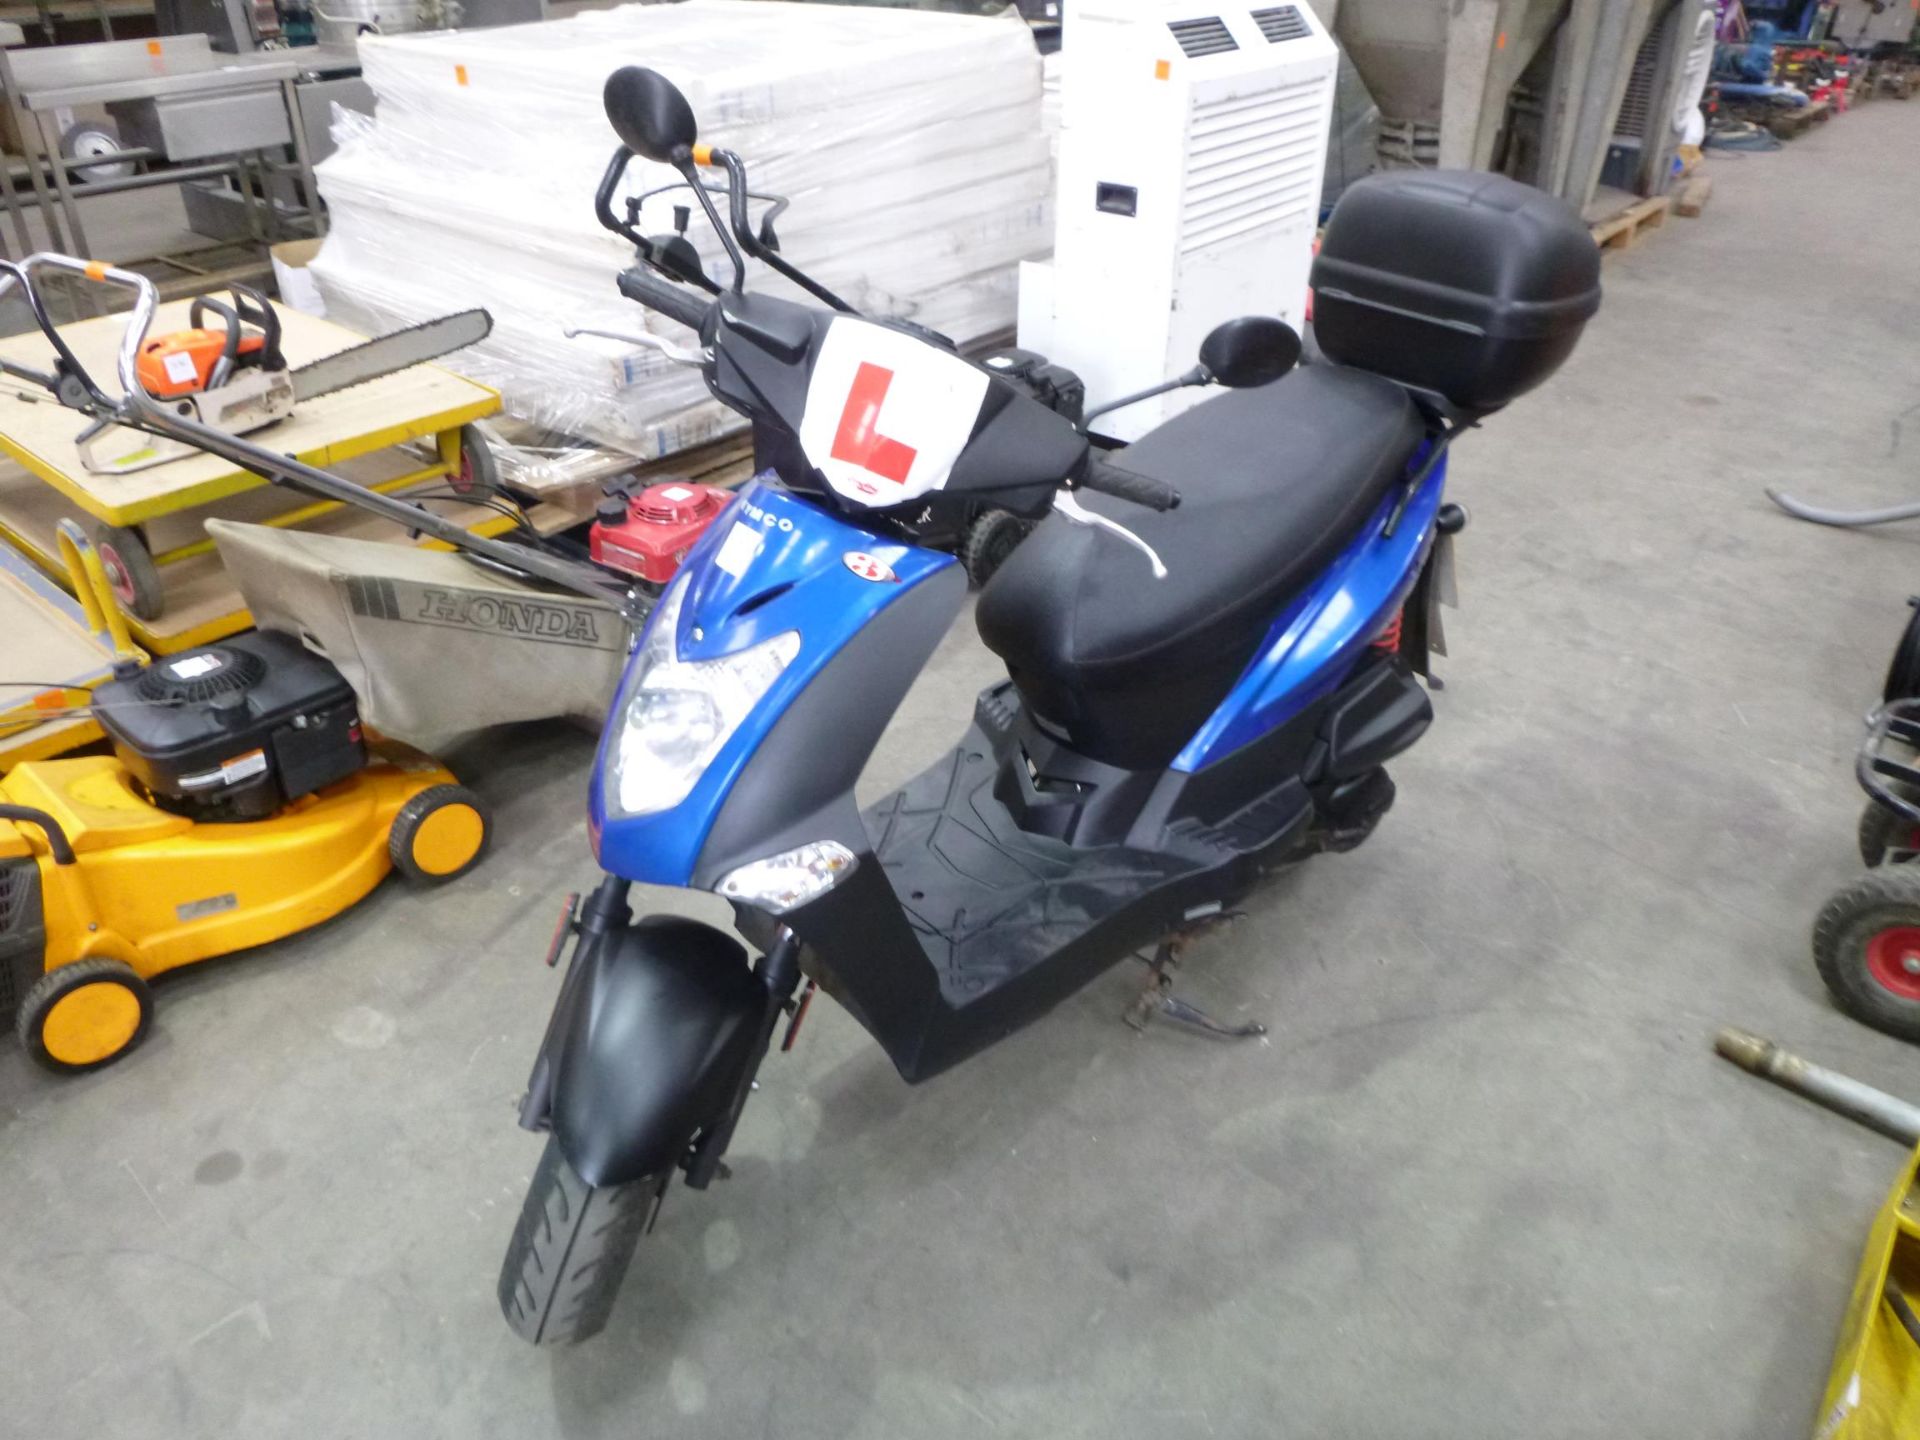 A Kymco Agility Scooter 125cc in Blue Automatic Transmission c/w Top Box and V5, Date of First